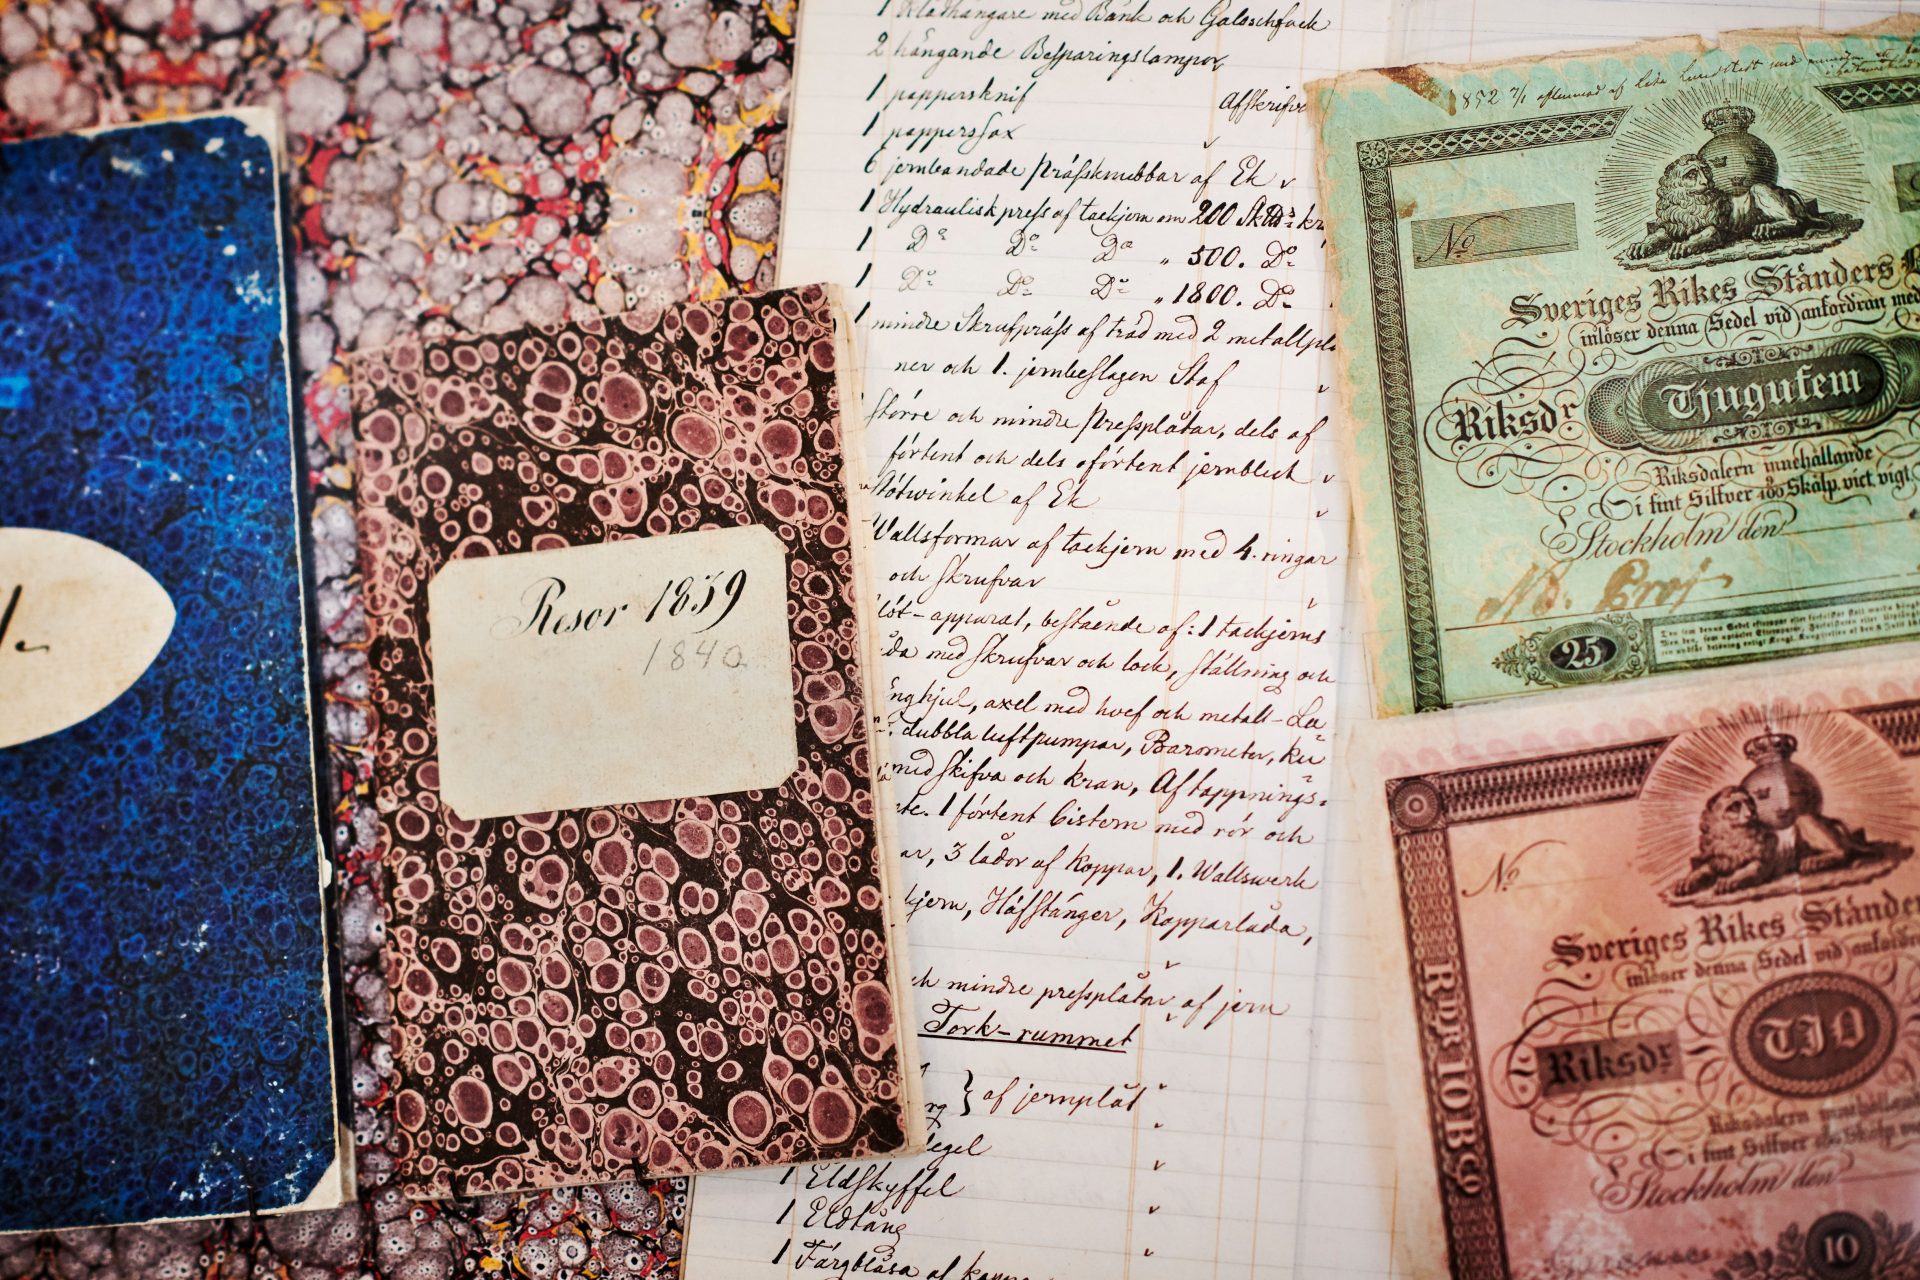 Notebooks and banknotes.